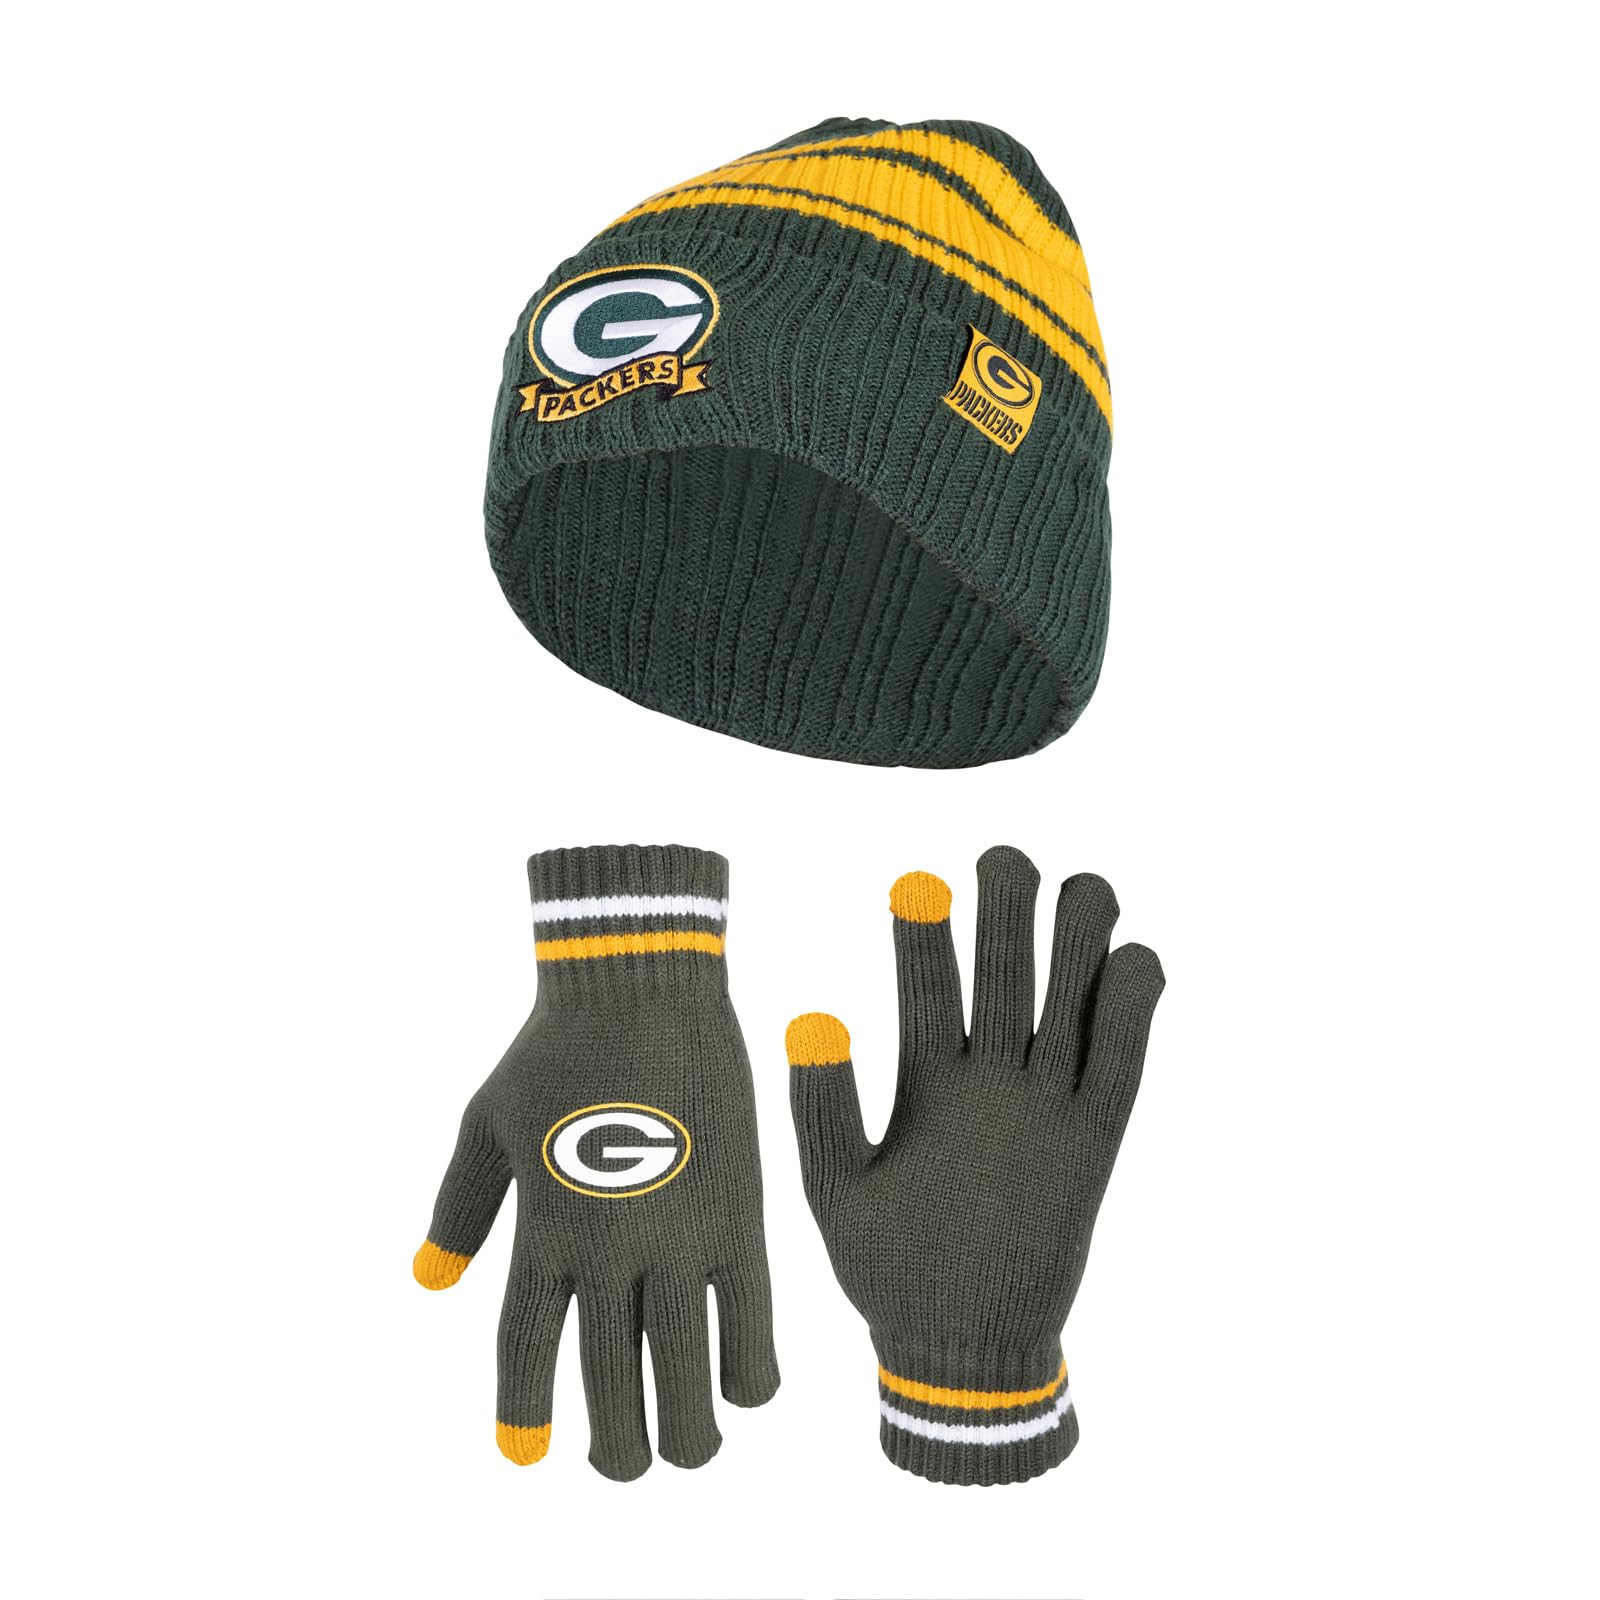 Ultra Game NFL Green Bay Packers Womens Super Soft Team Stripe Winter Beanie Knit Hat with Extra Warm Touch Screen Gloves|Green Bay Packers